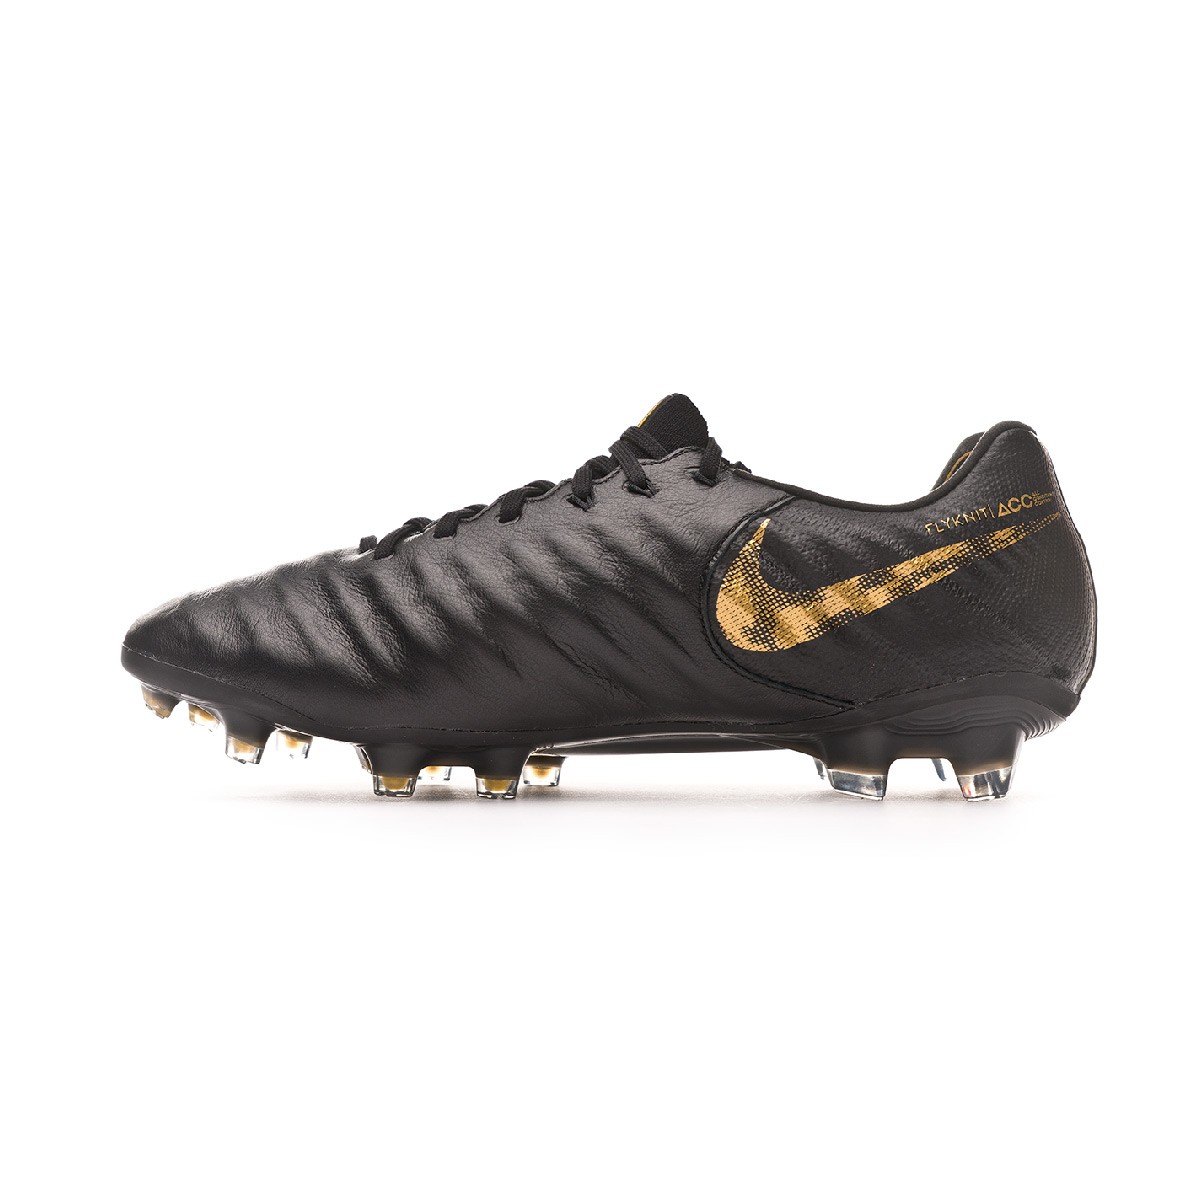 black and gold football boots nike